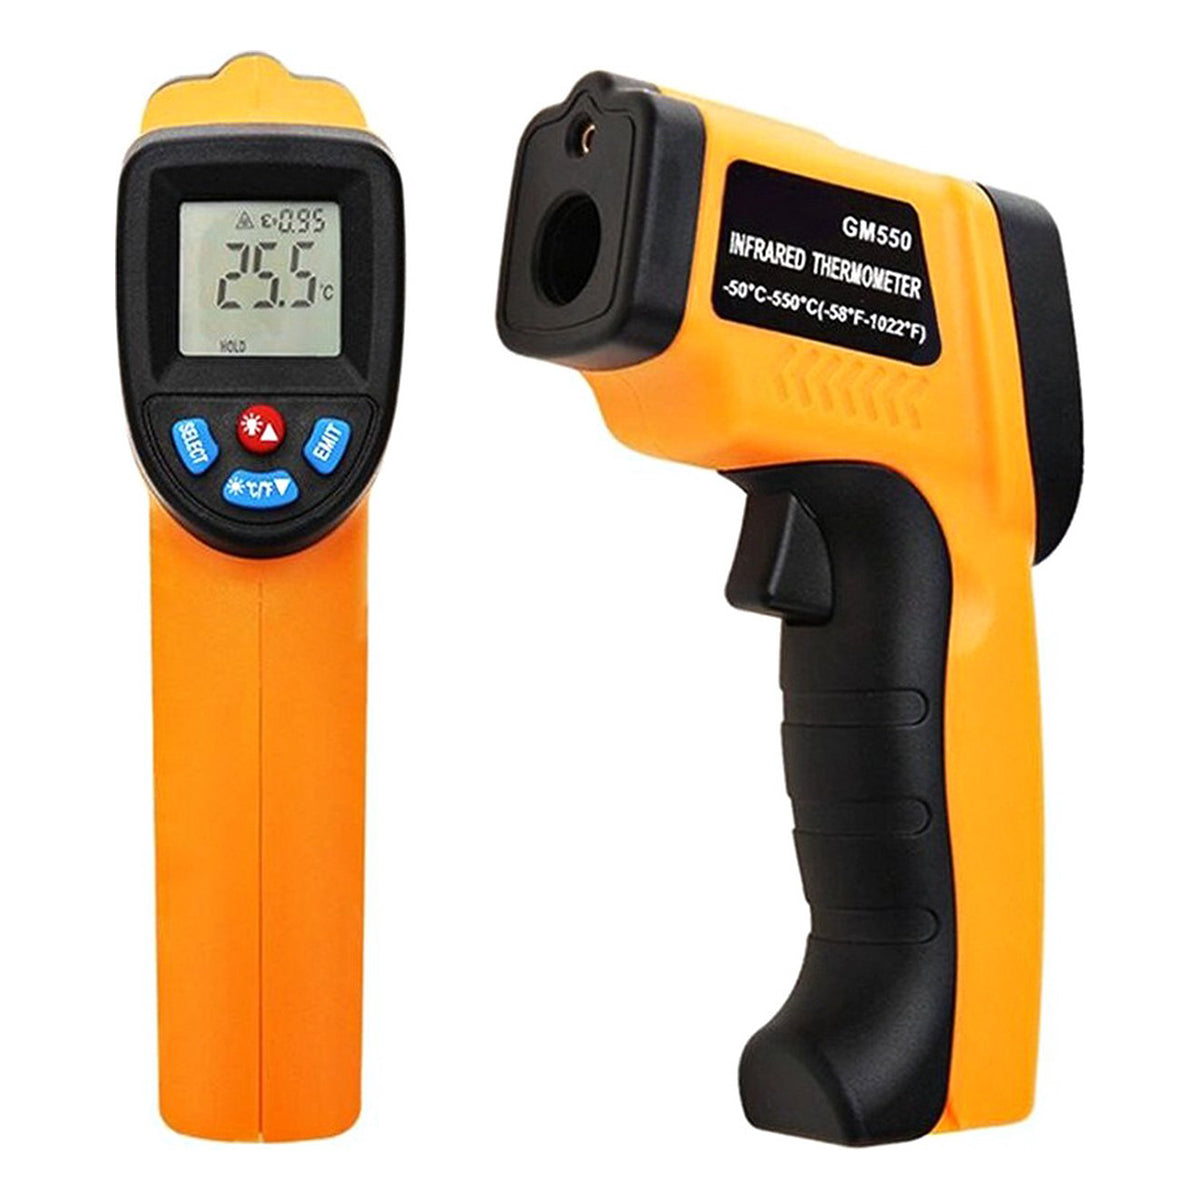 <tc>Ariko</tc>  Infrared Laser Thermometer - Surface thermometer - Non-contact - Laser pointer - Blacklight LCD Screen - Incl Batteries - Orange - up to 550º